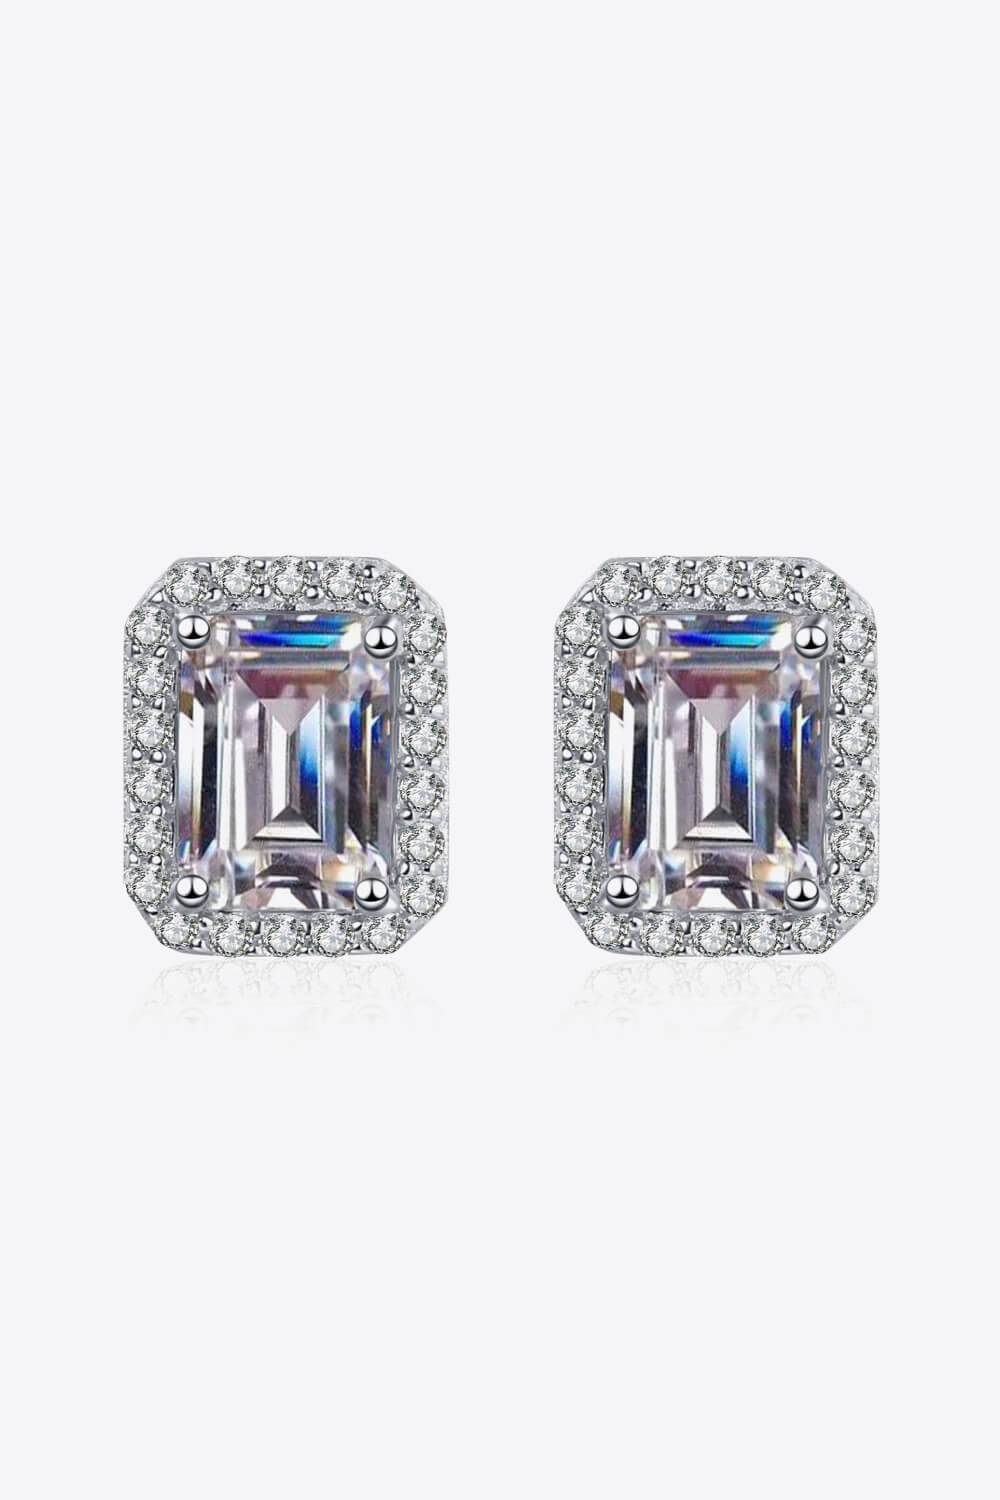 Captivate Hearts with the Radiance of 1 Carat Moissanite Rhodium-Plated Square Stud Earrings - Unmatched Elegance and Enchanting Lightweight Perfect for any Romantic Occasion. - Guy Christopher